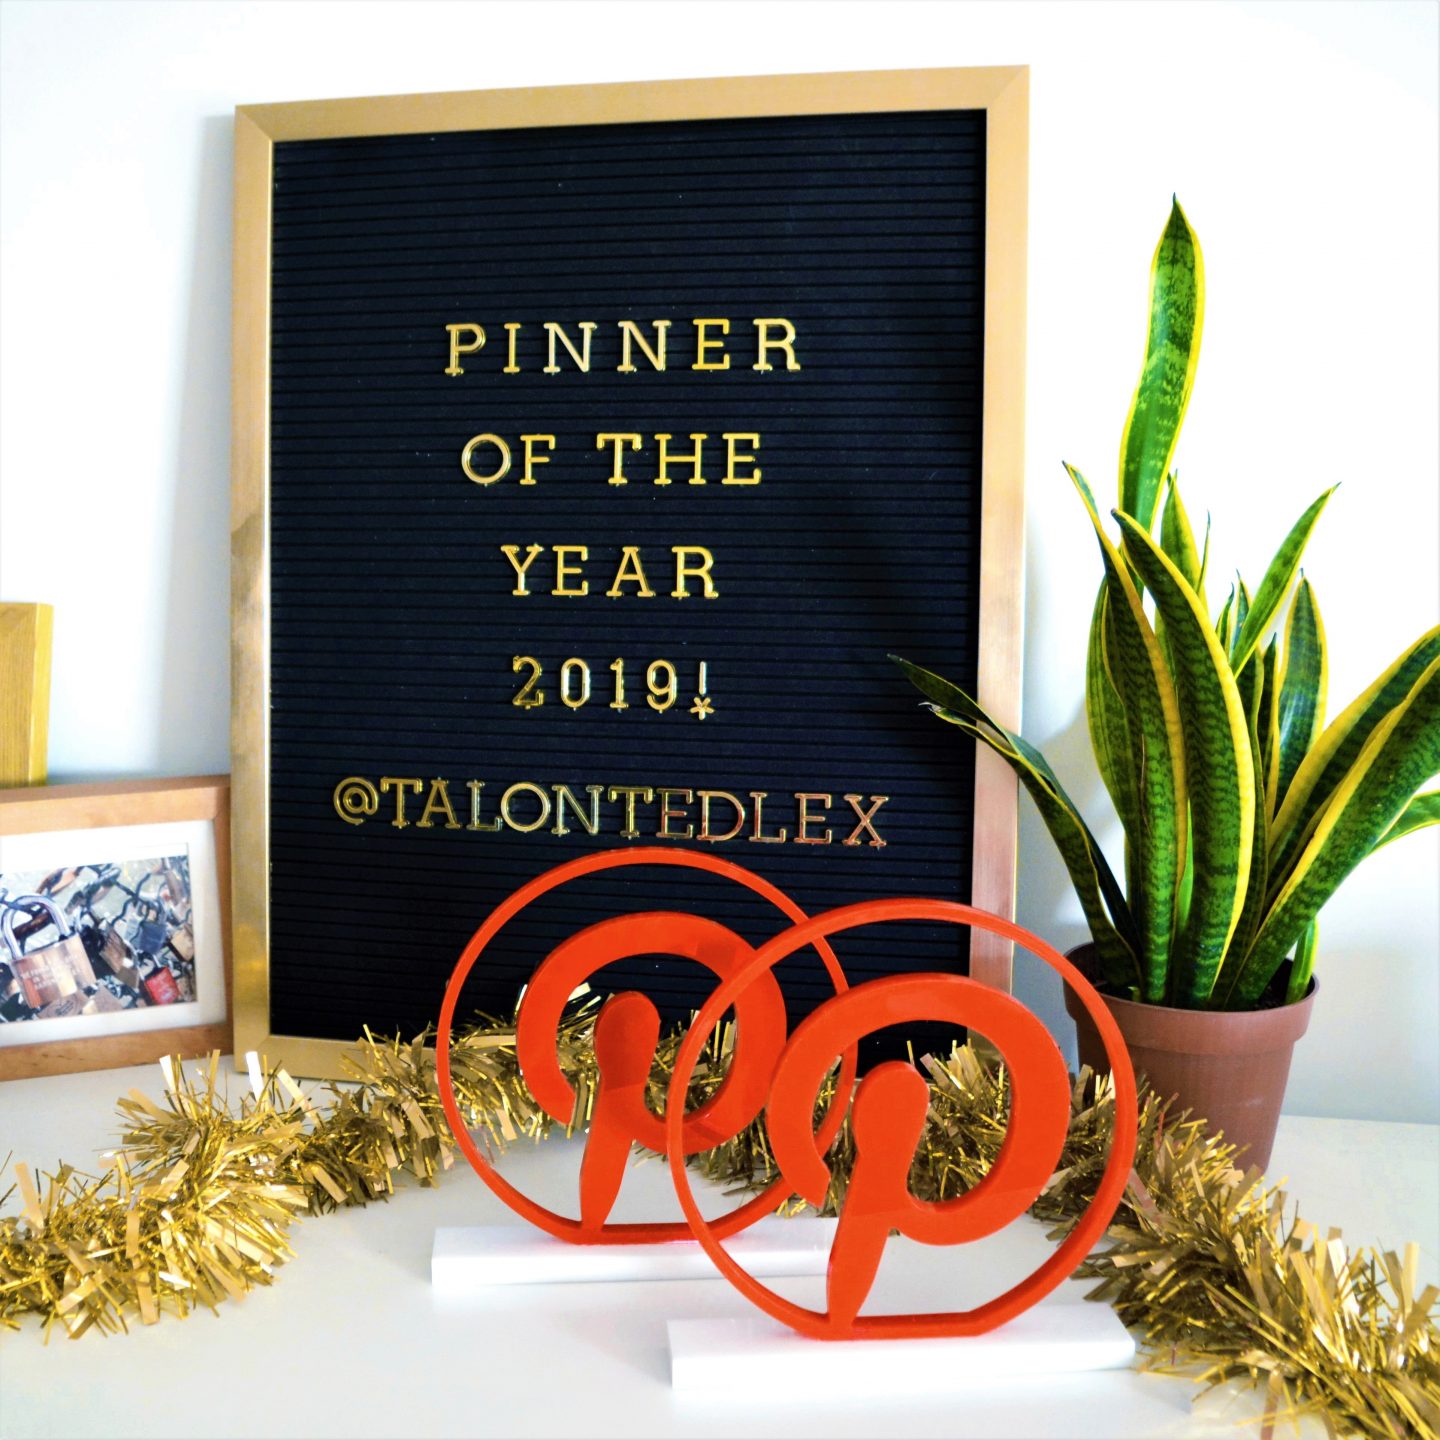 I'm Pinner Of The Year 2019! Read all about the recent Pinterest Awards on my blog. #talontedlex #pinneroftheyear #pinterestawards #pinterestmarketing #pinterestforbloggers